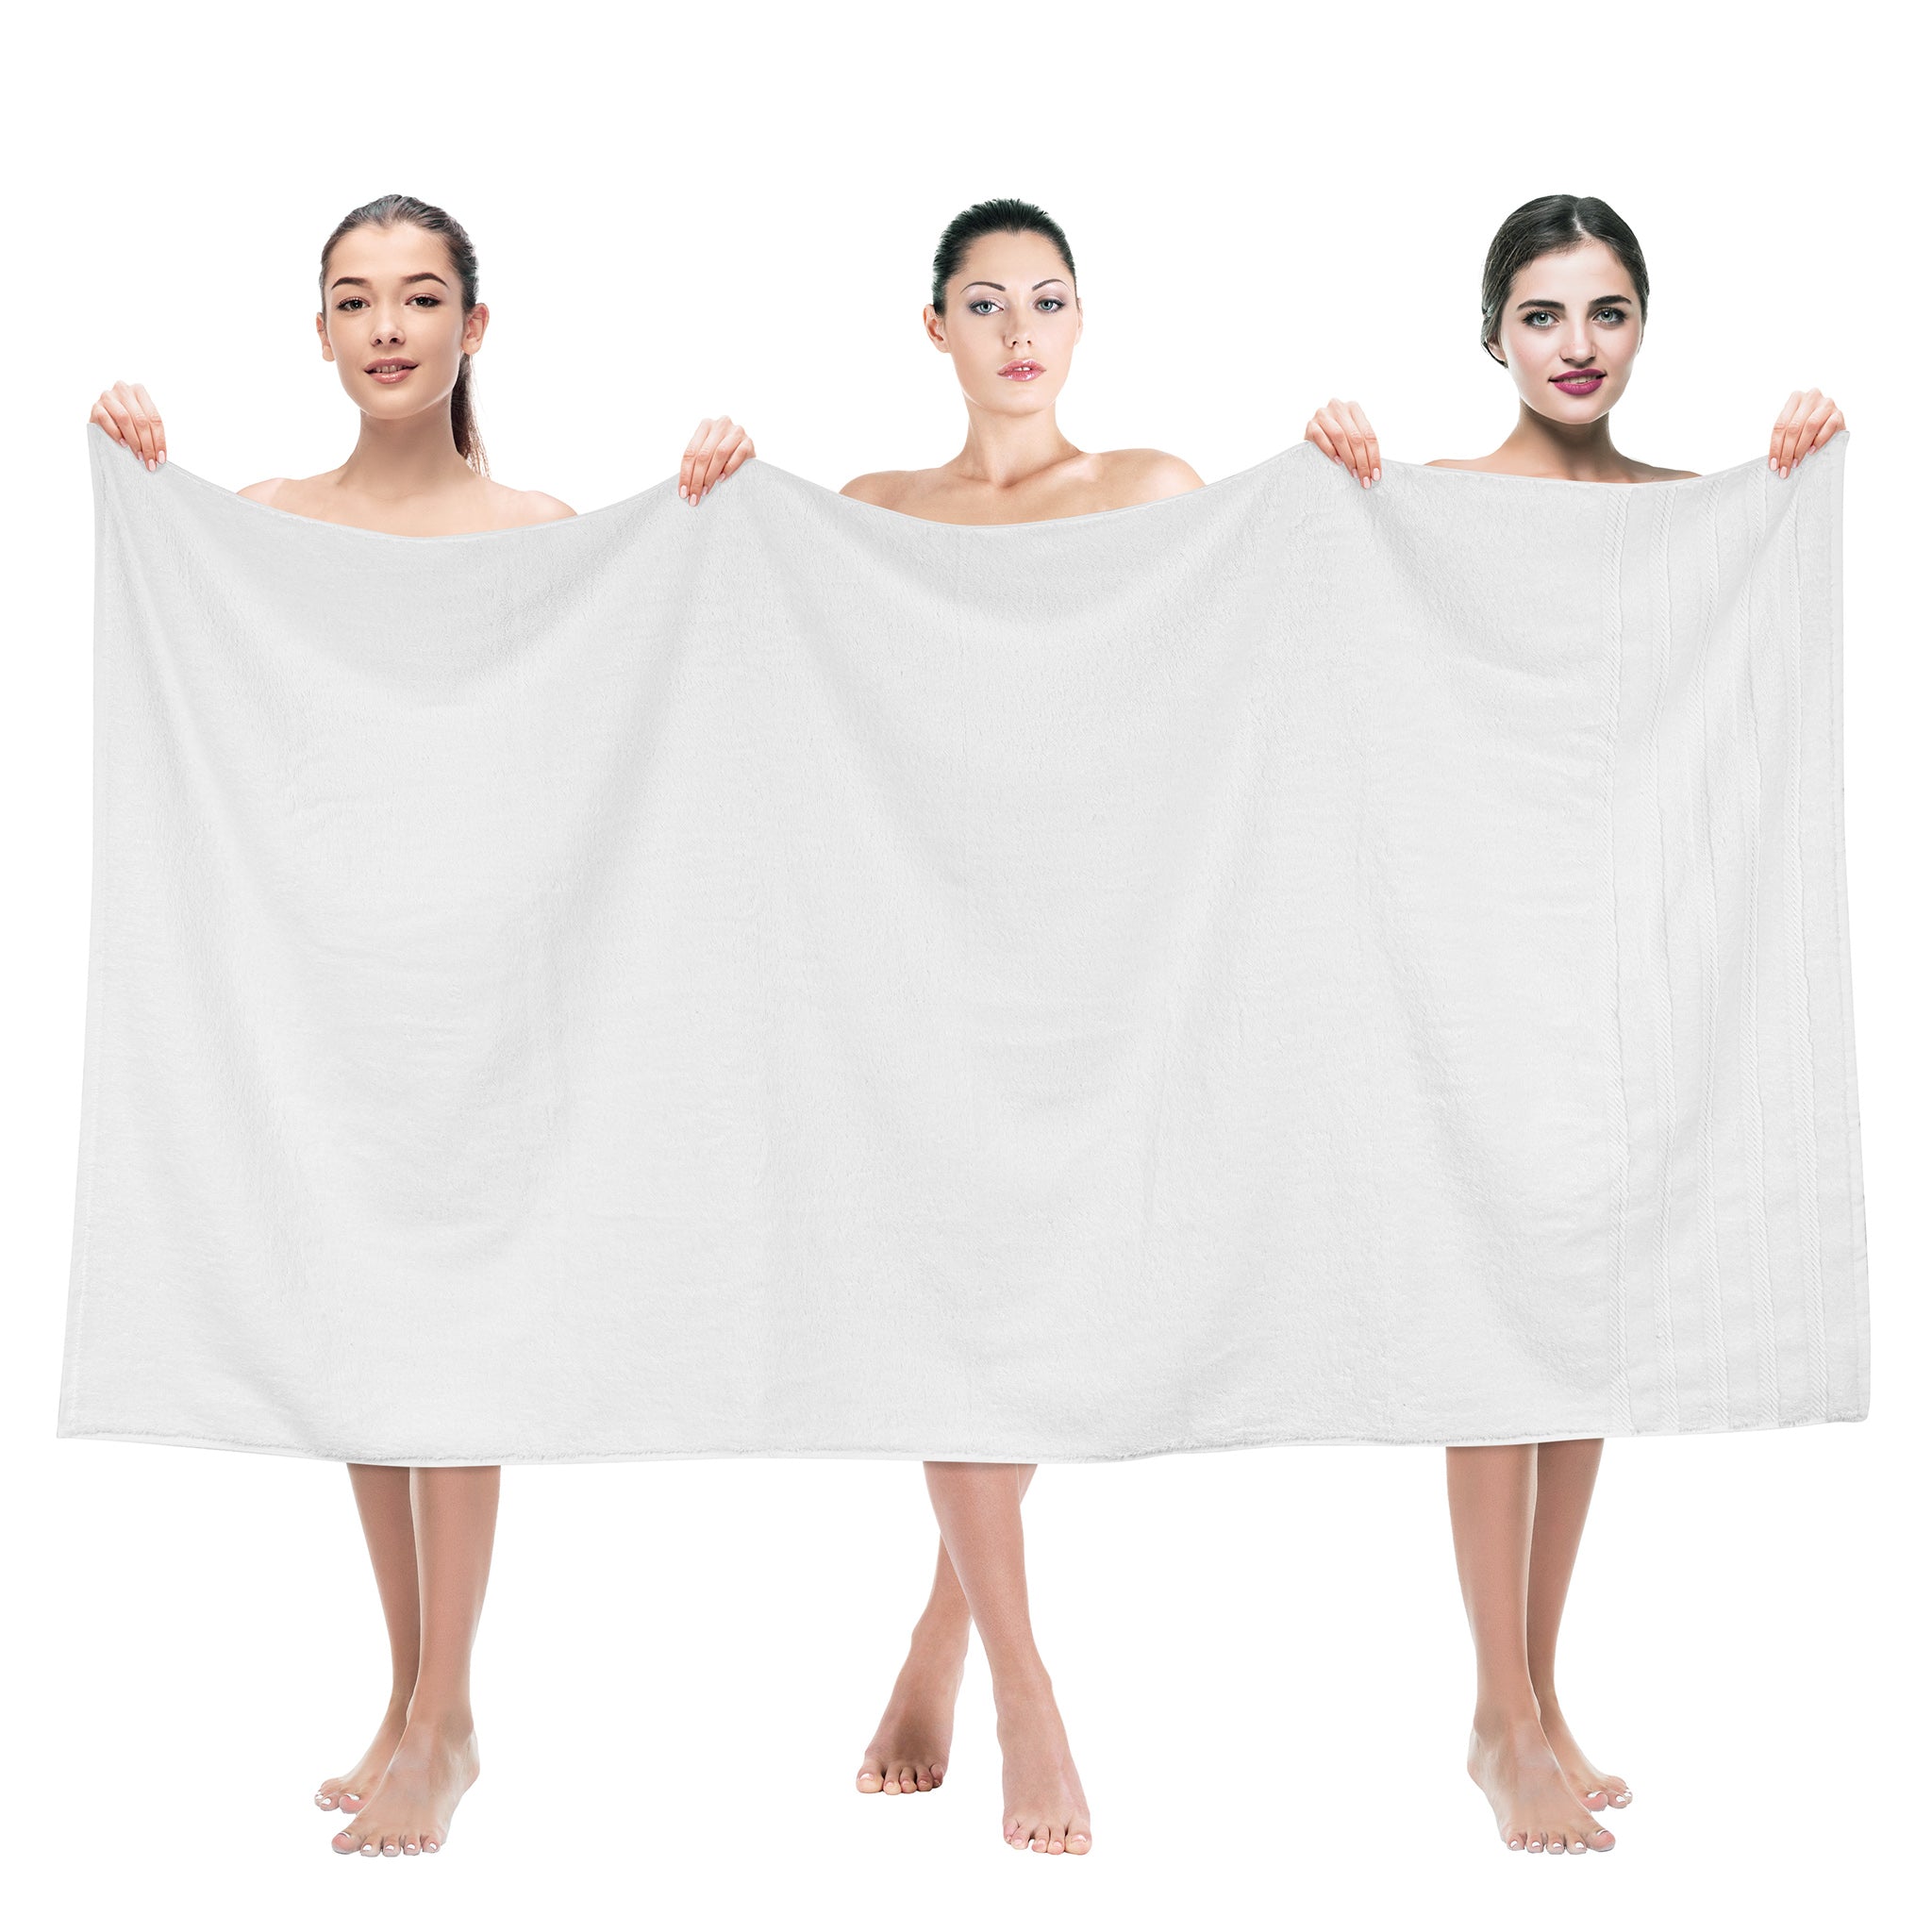 35 x 70 Oversized Bath Sheet - Ribbed Towel Collection